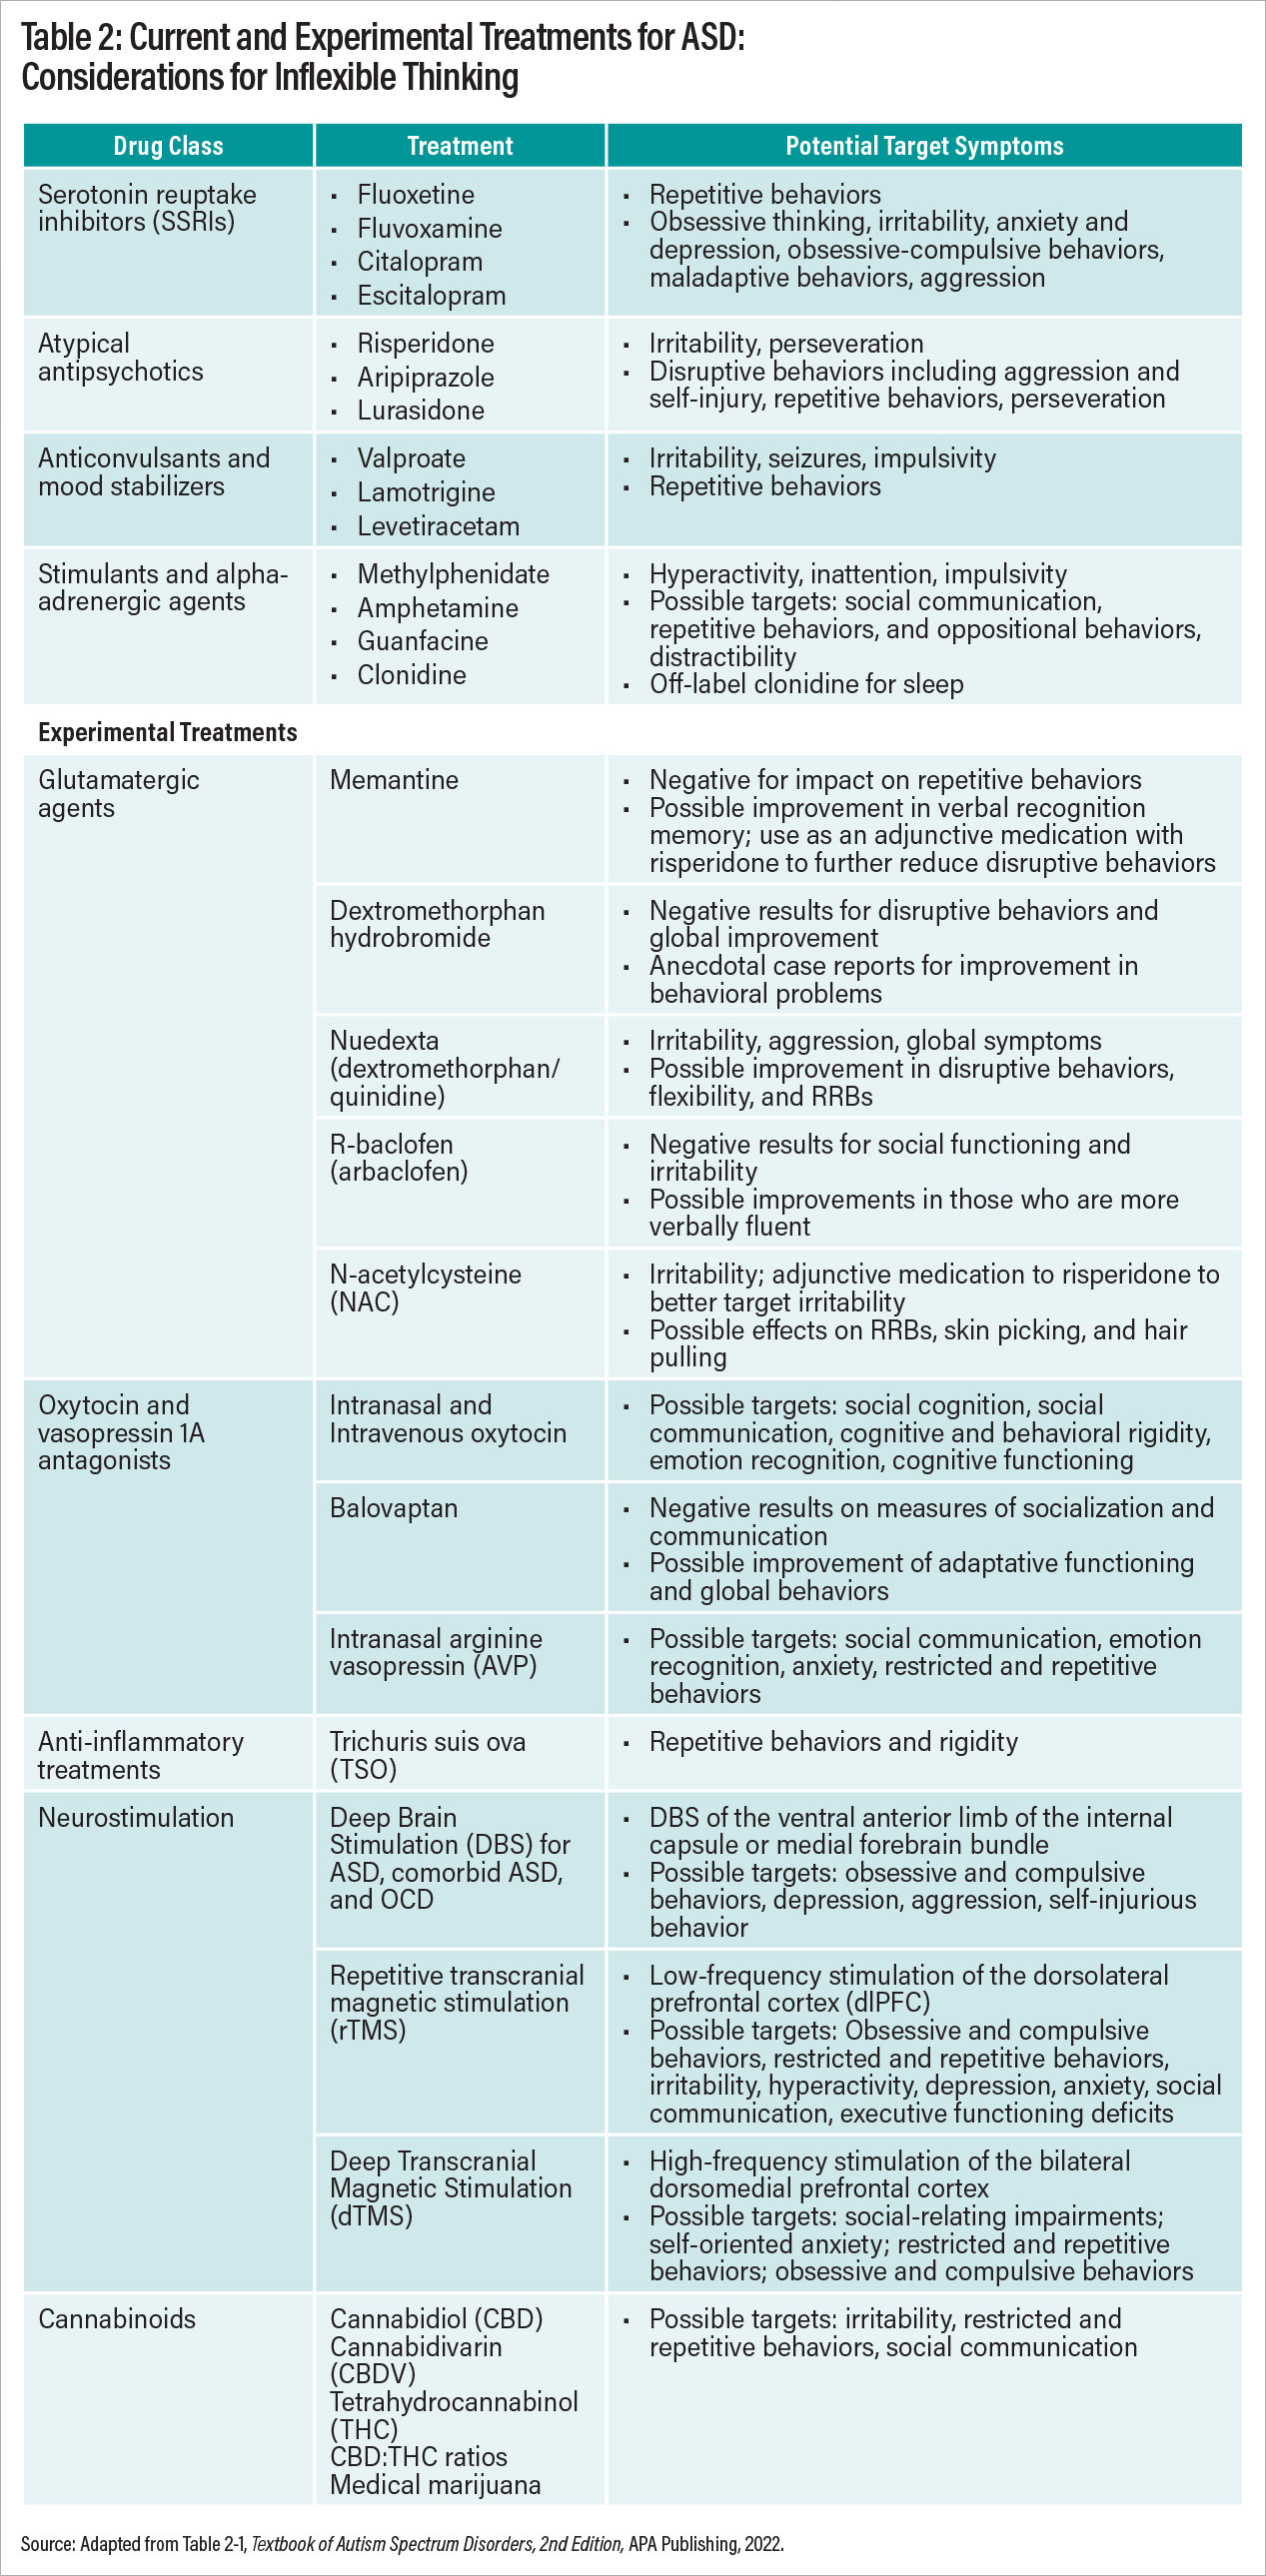 Table 2: Current and Experimental Treatments for ASD Considerations for Flexible Thinking